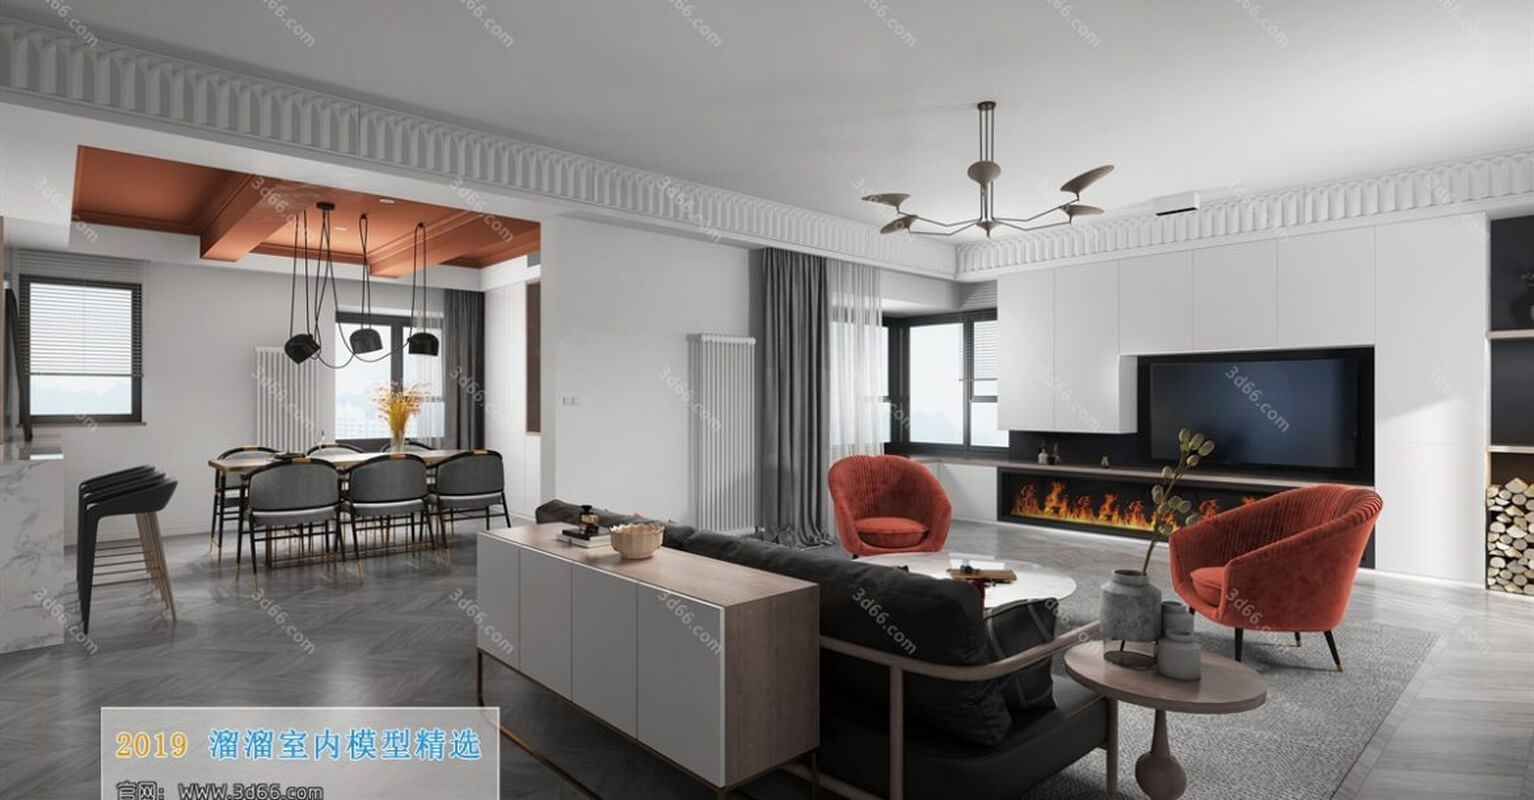 3D66 Living Room Interior 2019 Style (09)